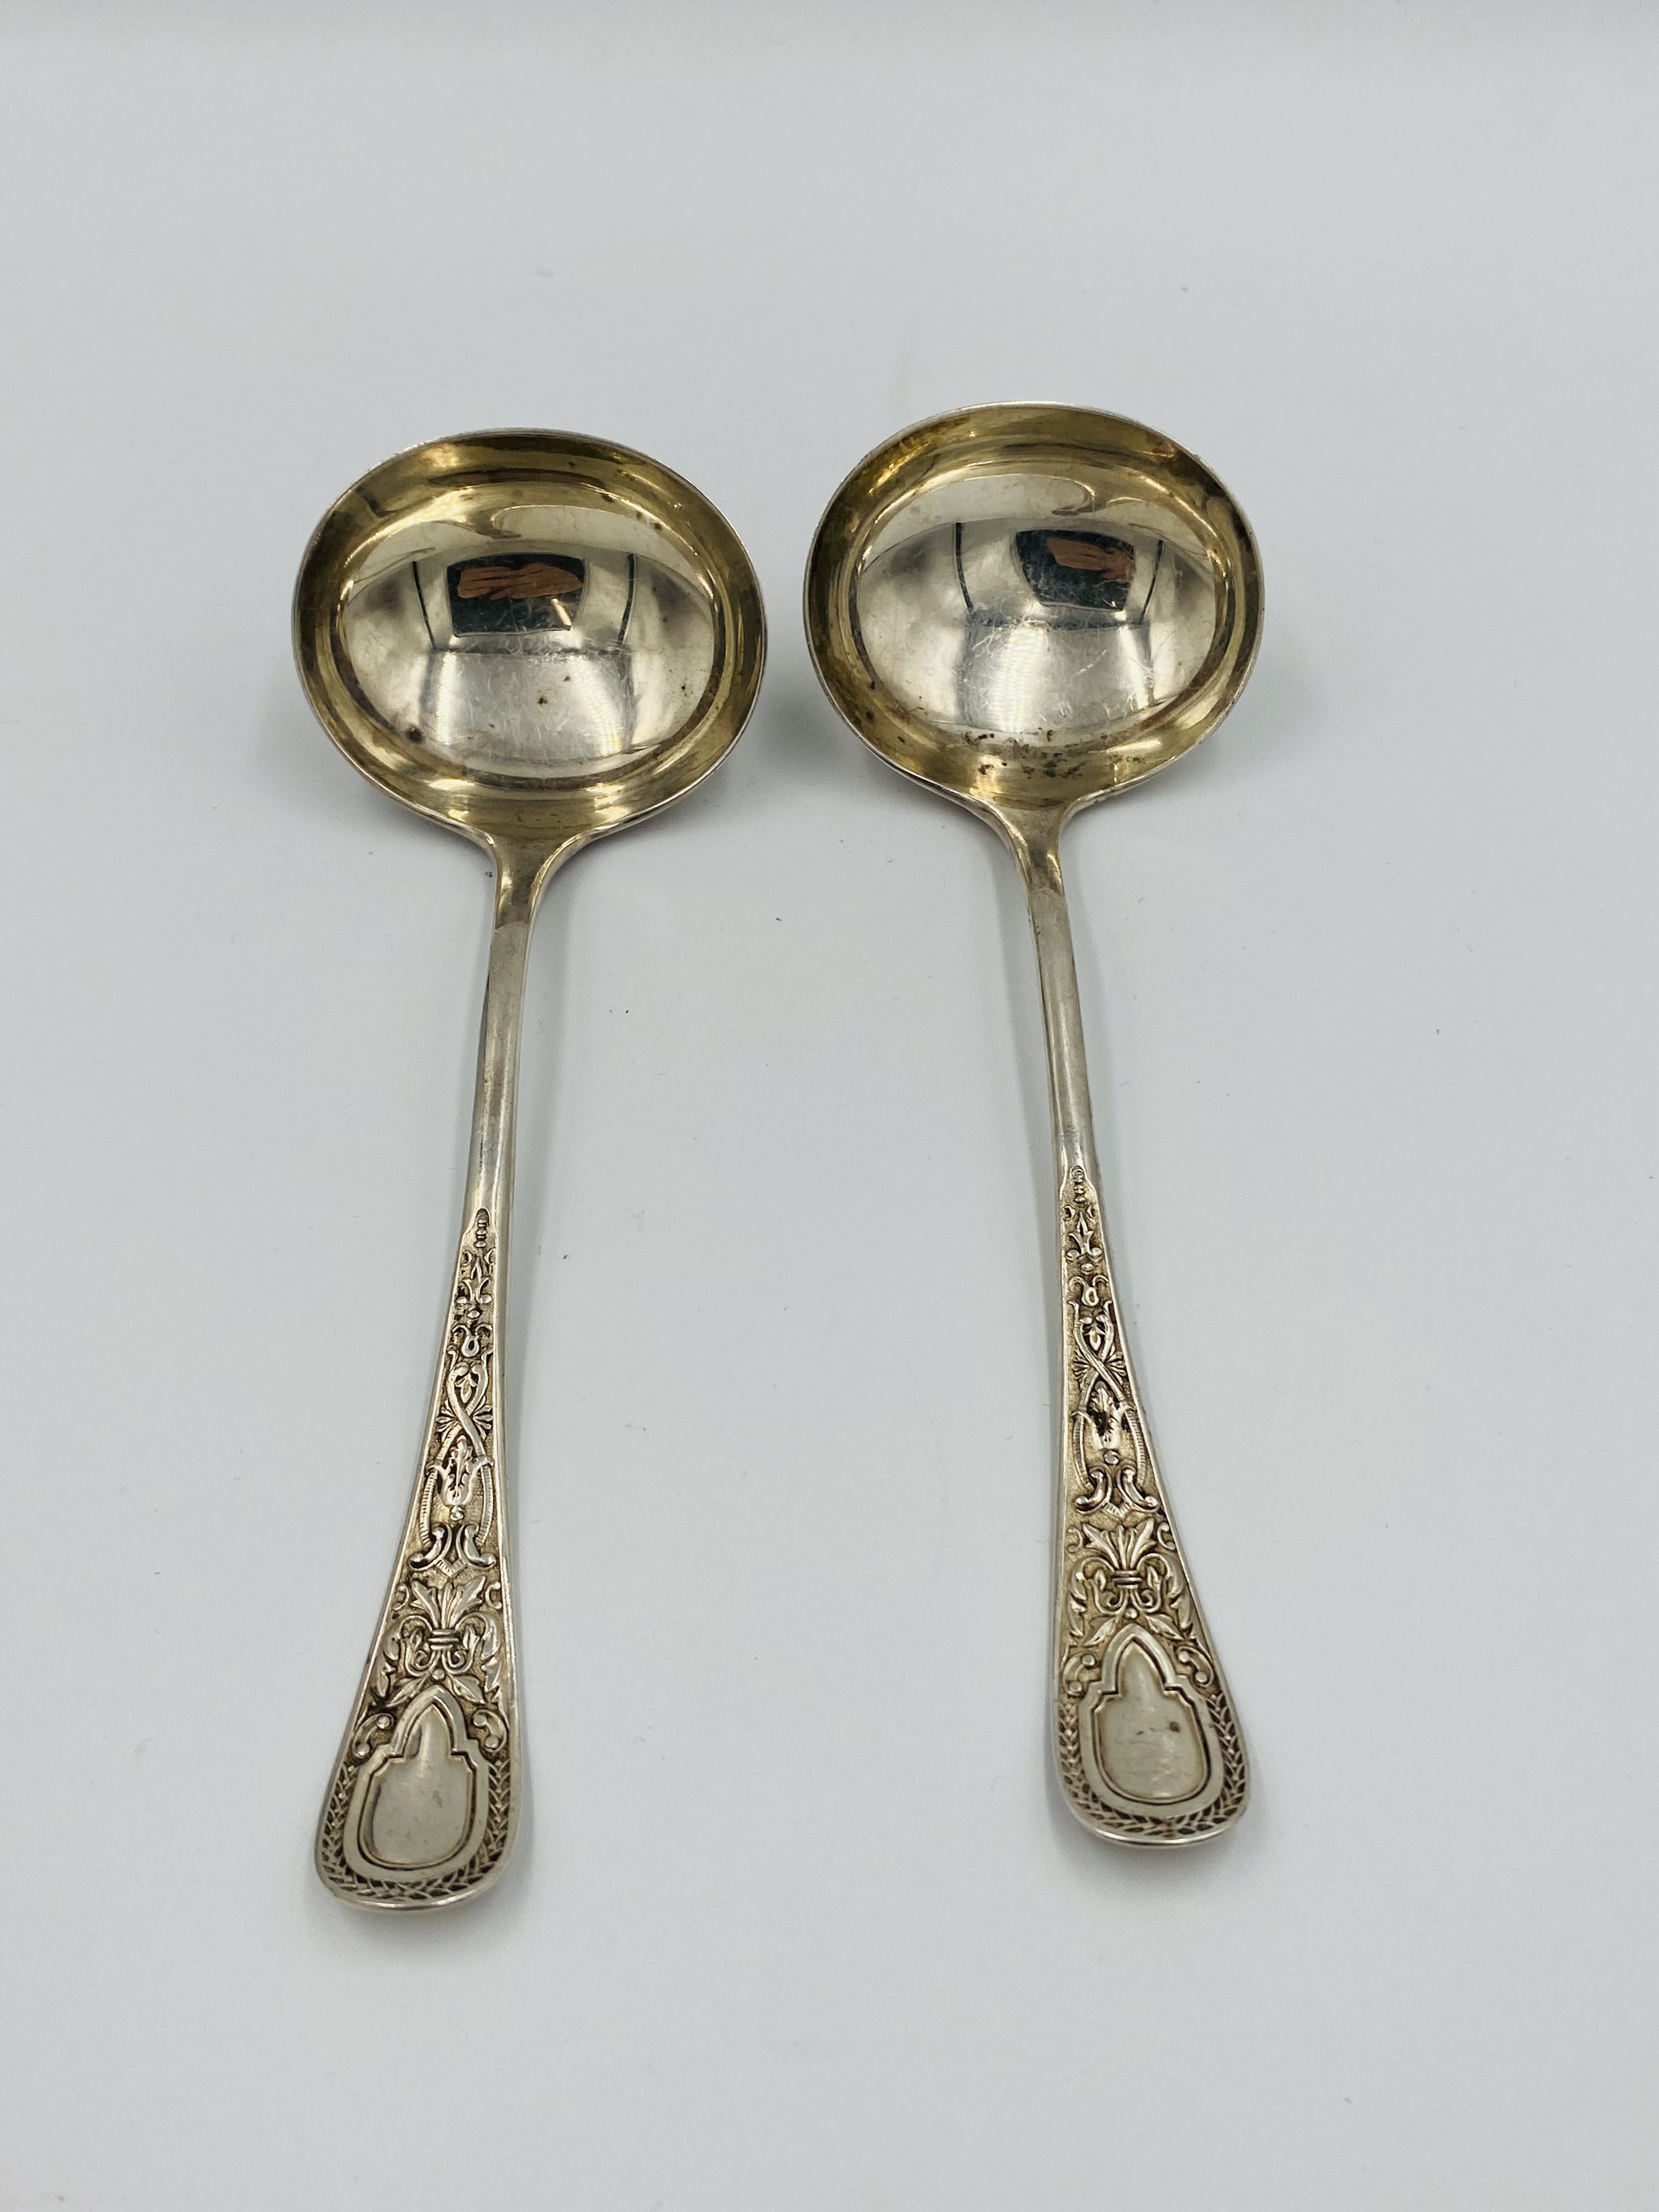 Pair of silver sauce ladles - Image 3 of 4